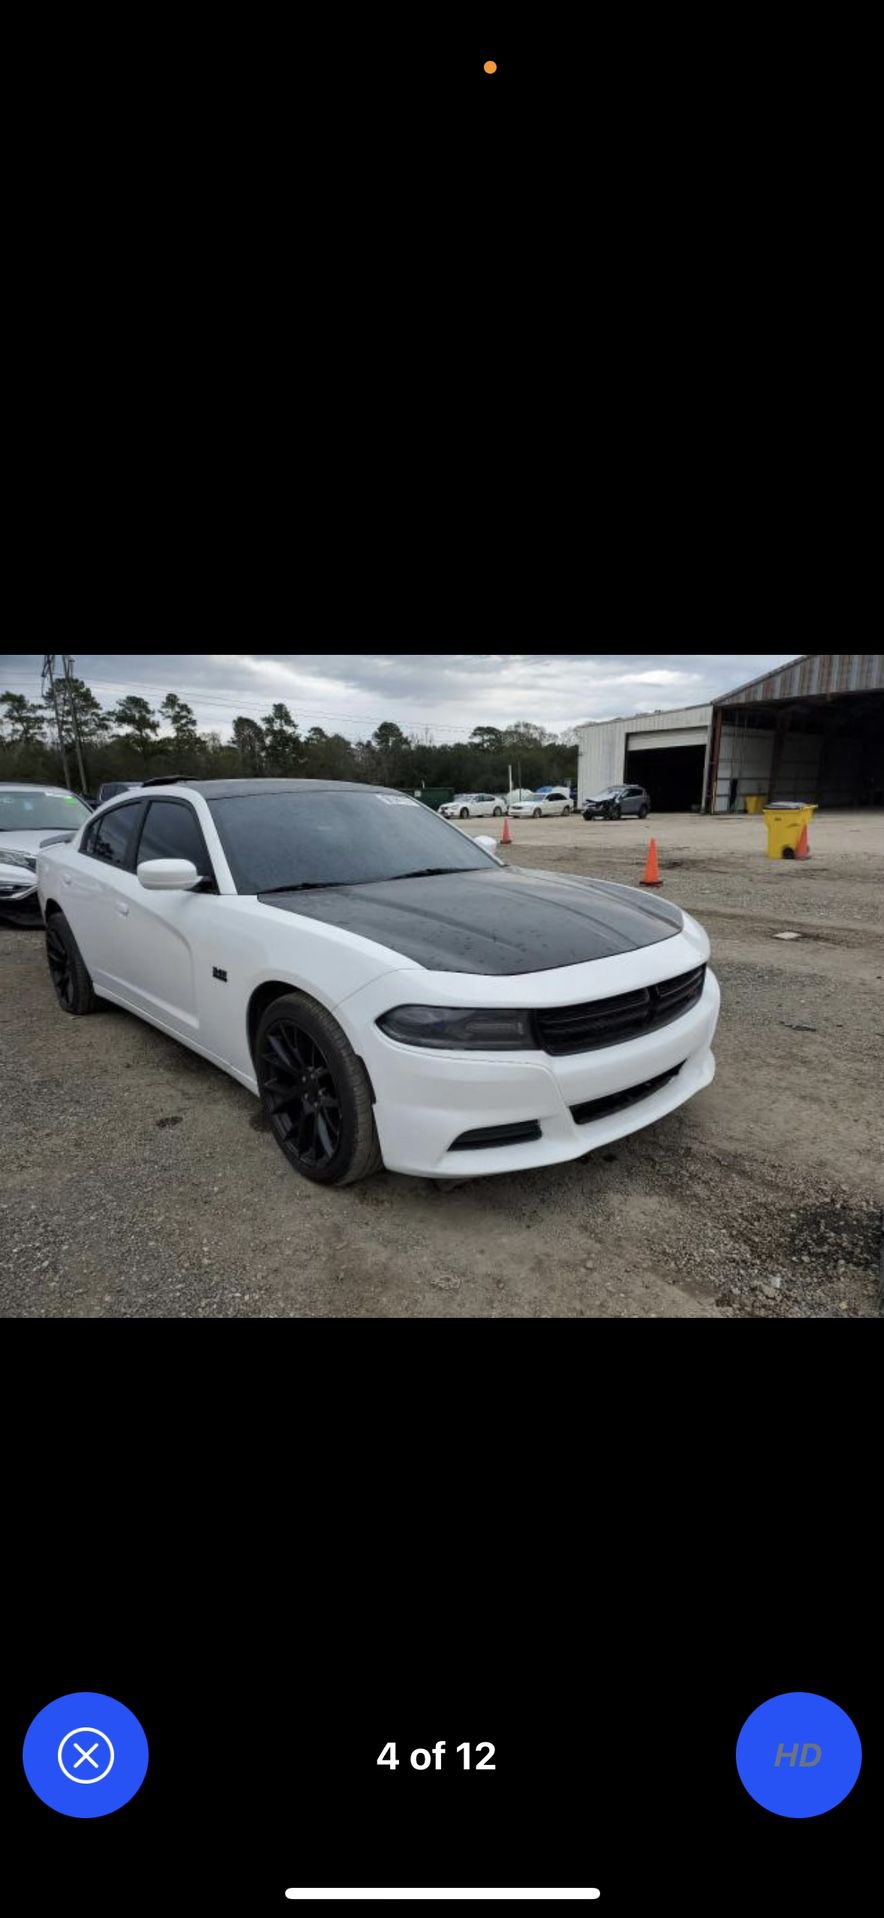 2015 Dodge Charger